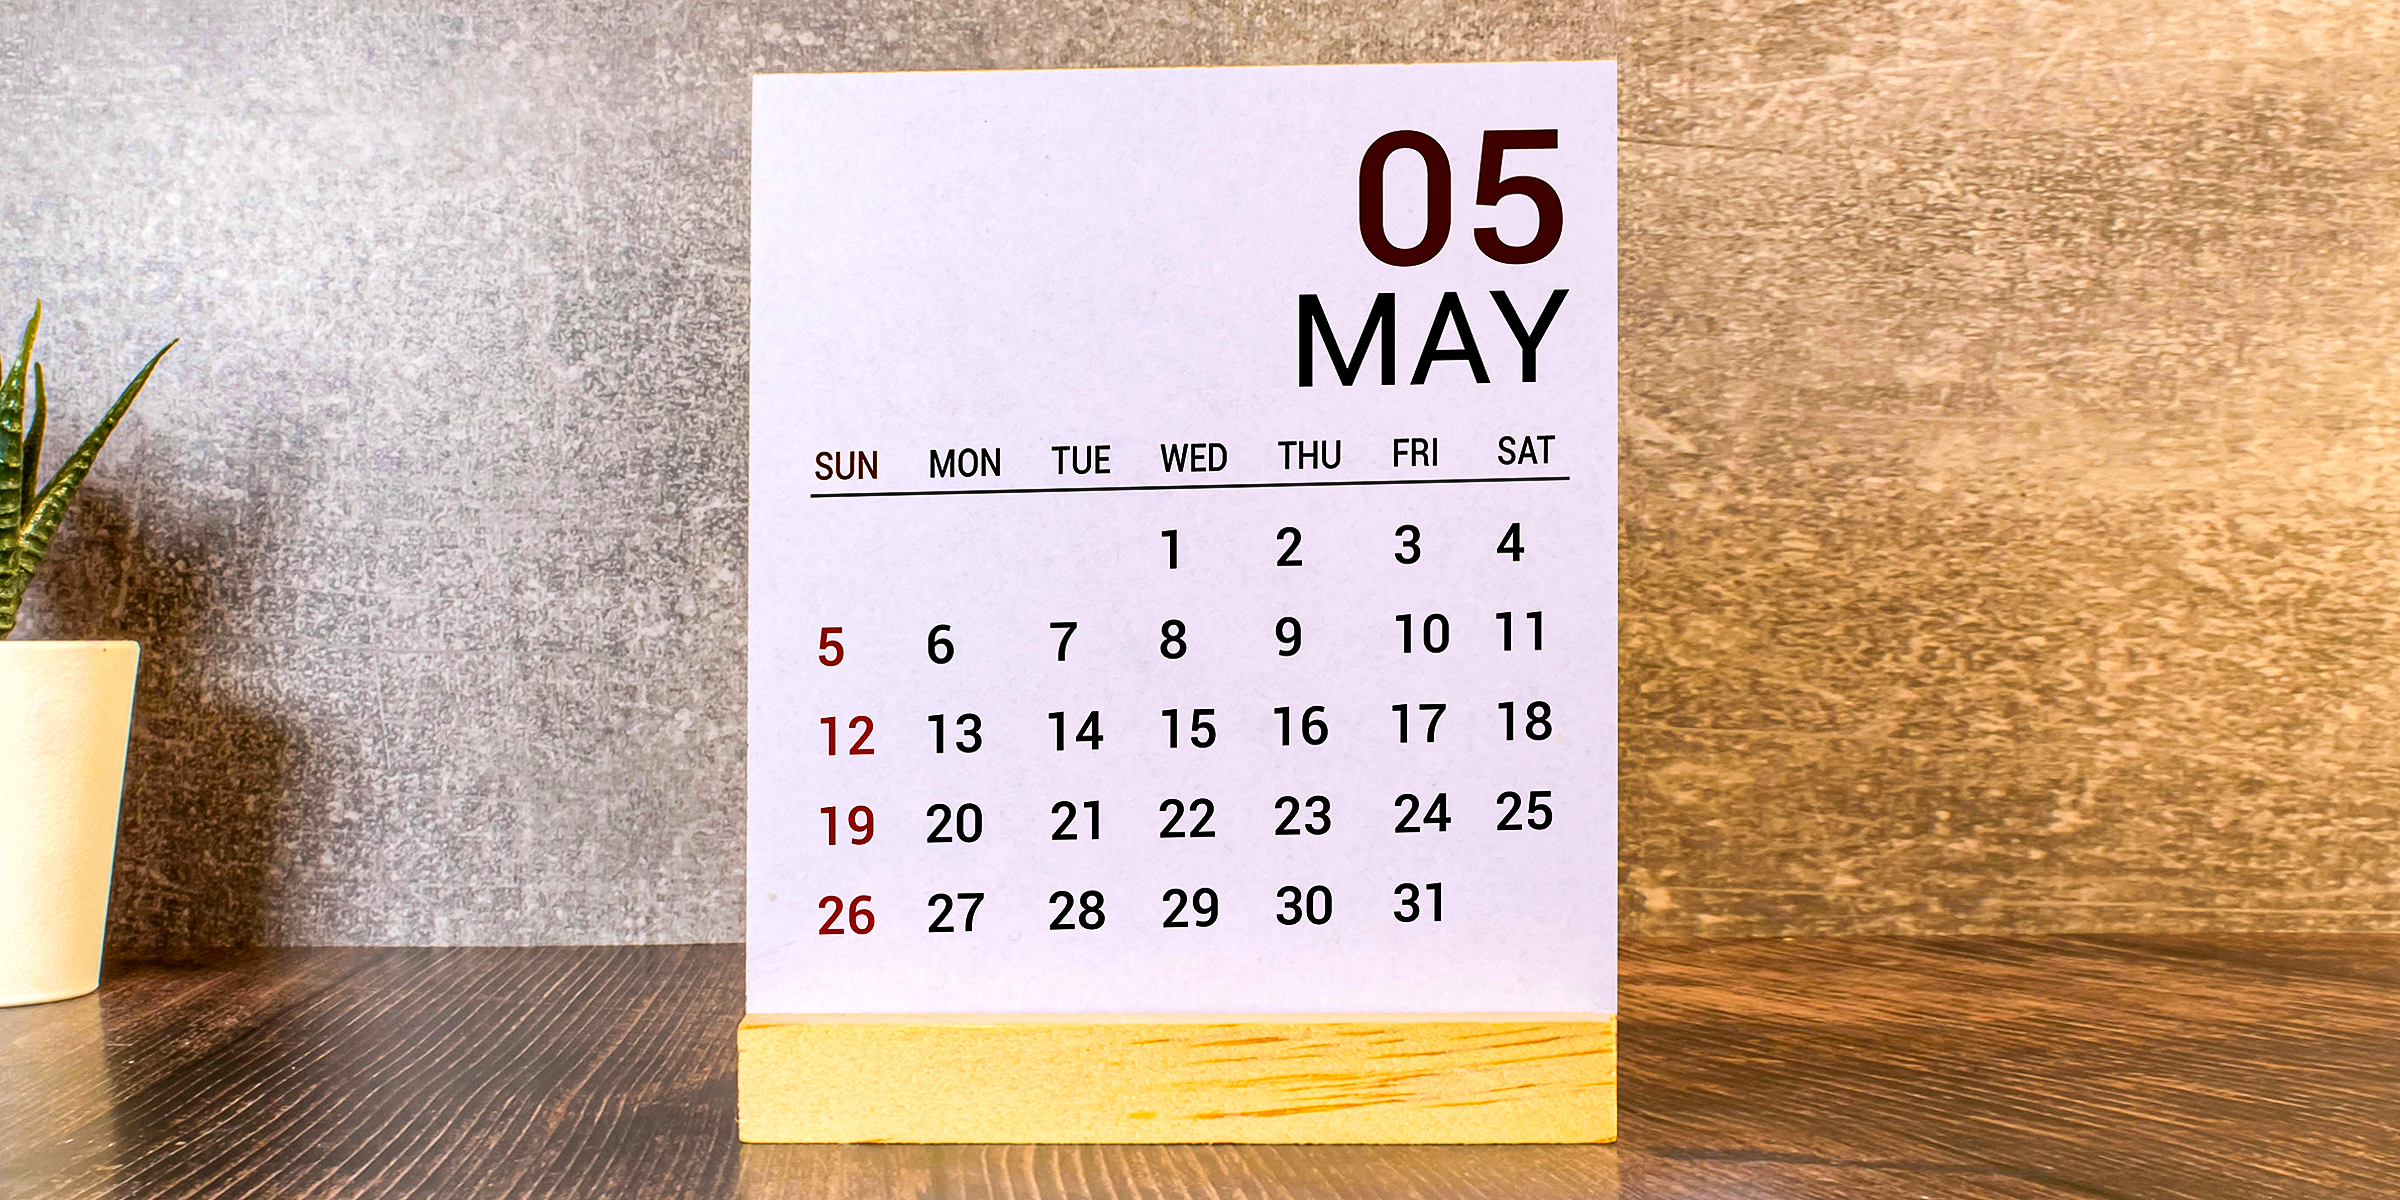 A calendar for the month of May | Source: Shutterstock